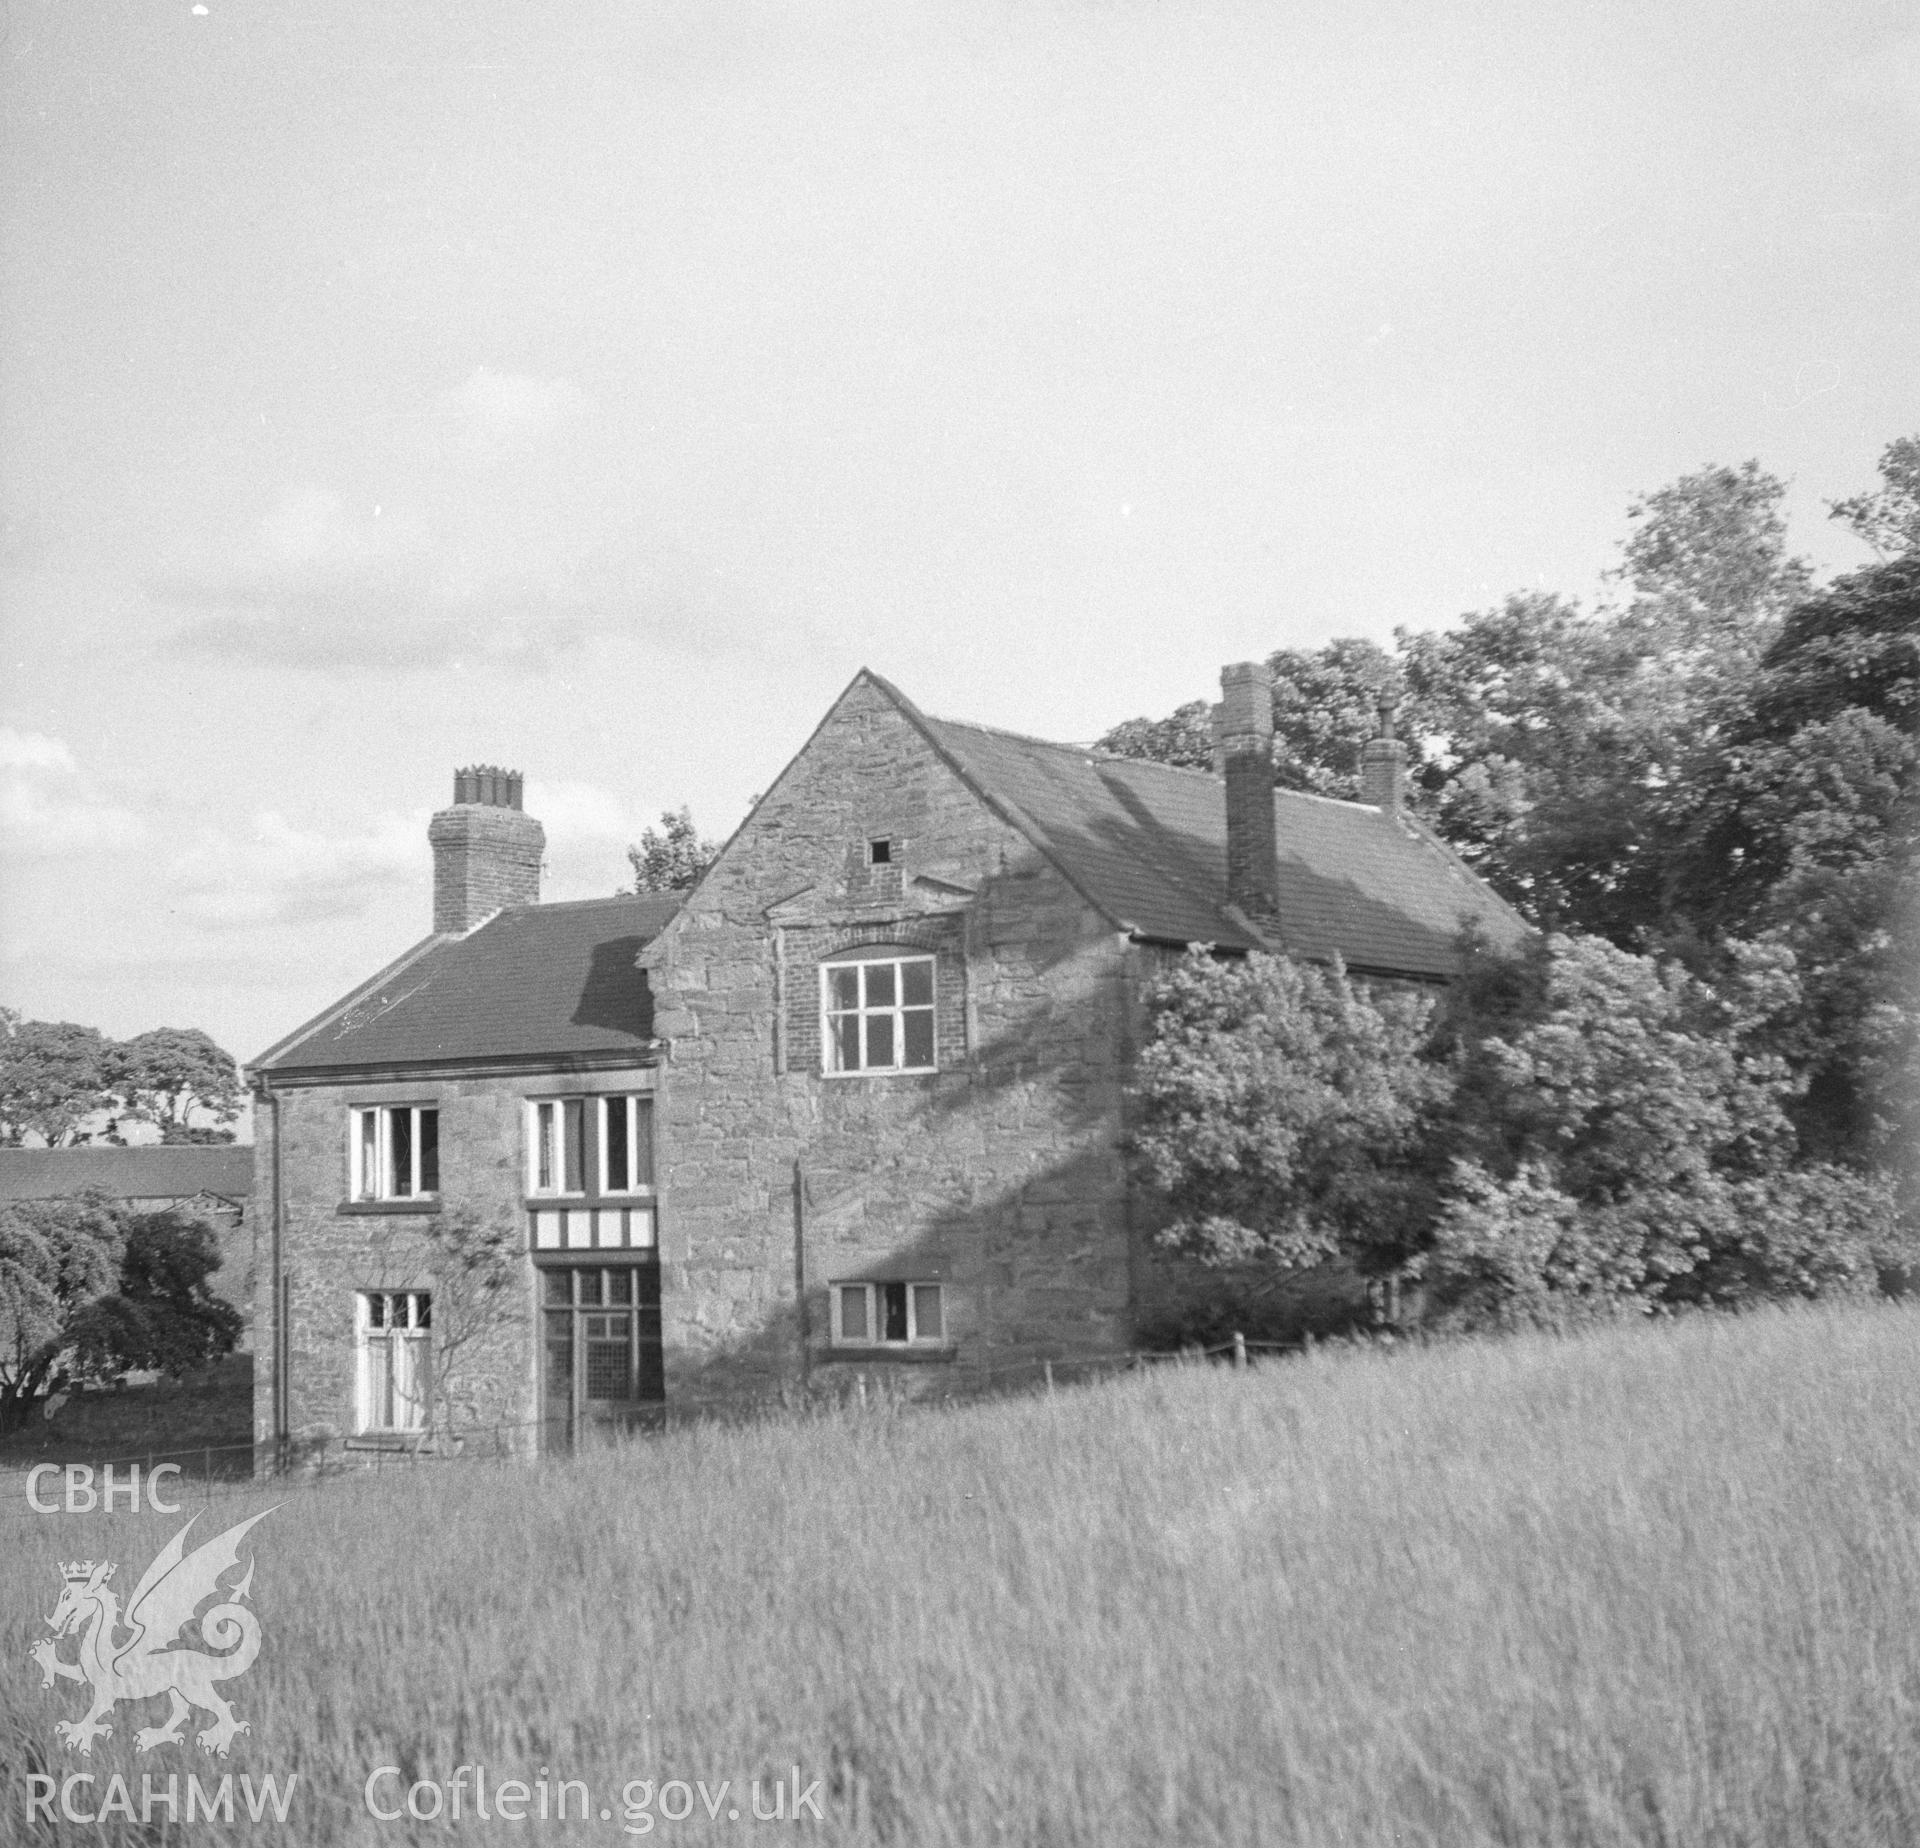 Digital copy of a black and white nitrate negative showing an exterior view of Llyseurgain, Northop.